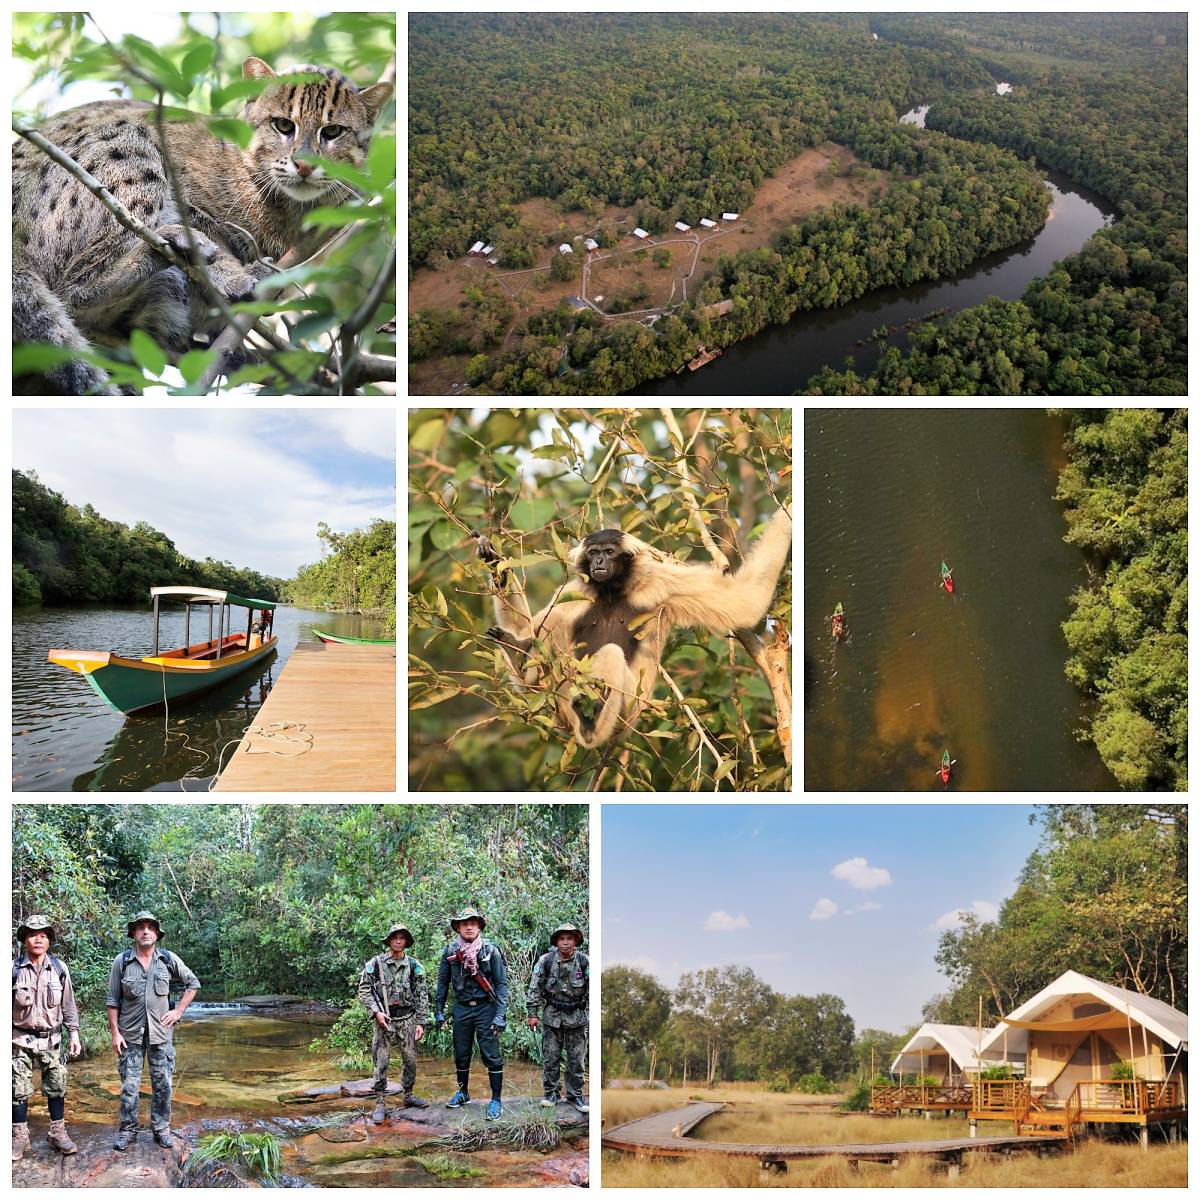 Cardamom Tented Camp in Cambodia Shortlisted as Global Finalist in WTTC Tourism for Tomorrow Awards